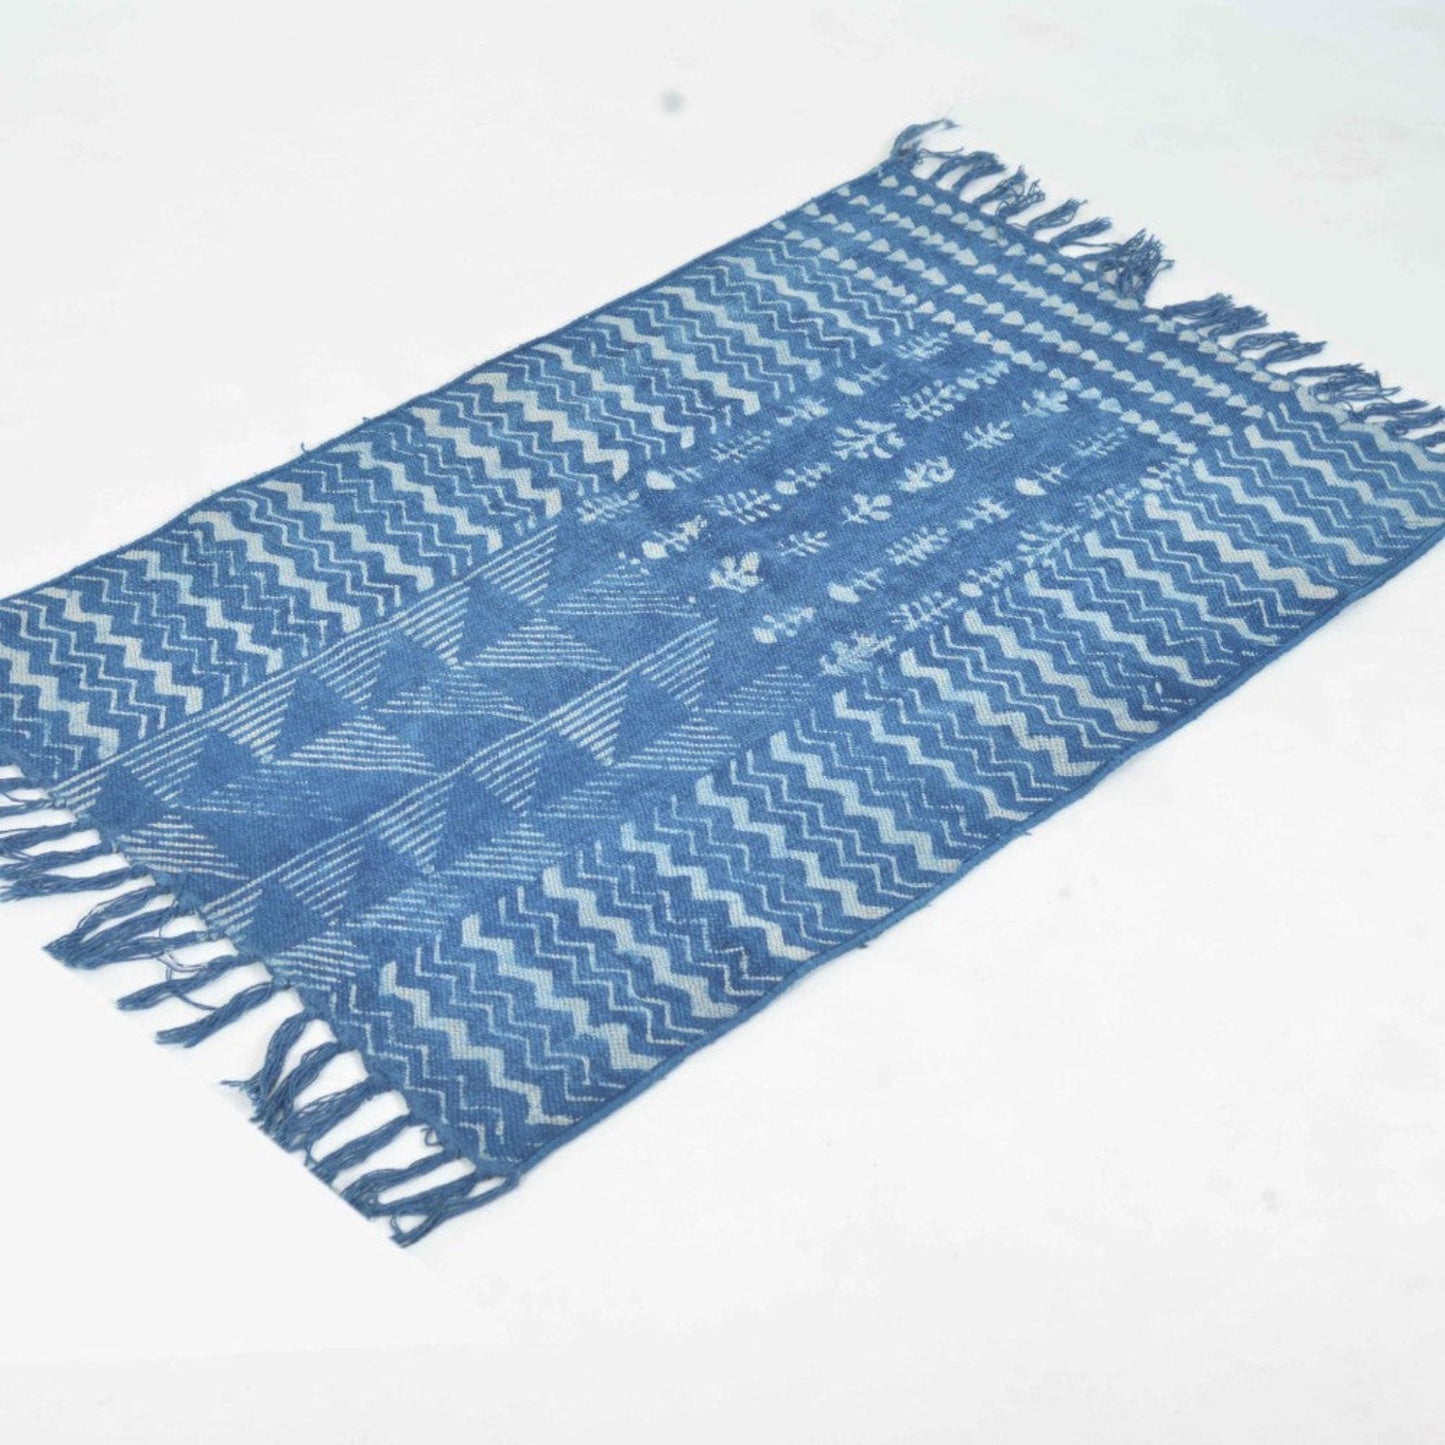 Hand Block Printed Cotton Rug in Indigo Blue with waves, triangles and flowers on it.